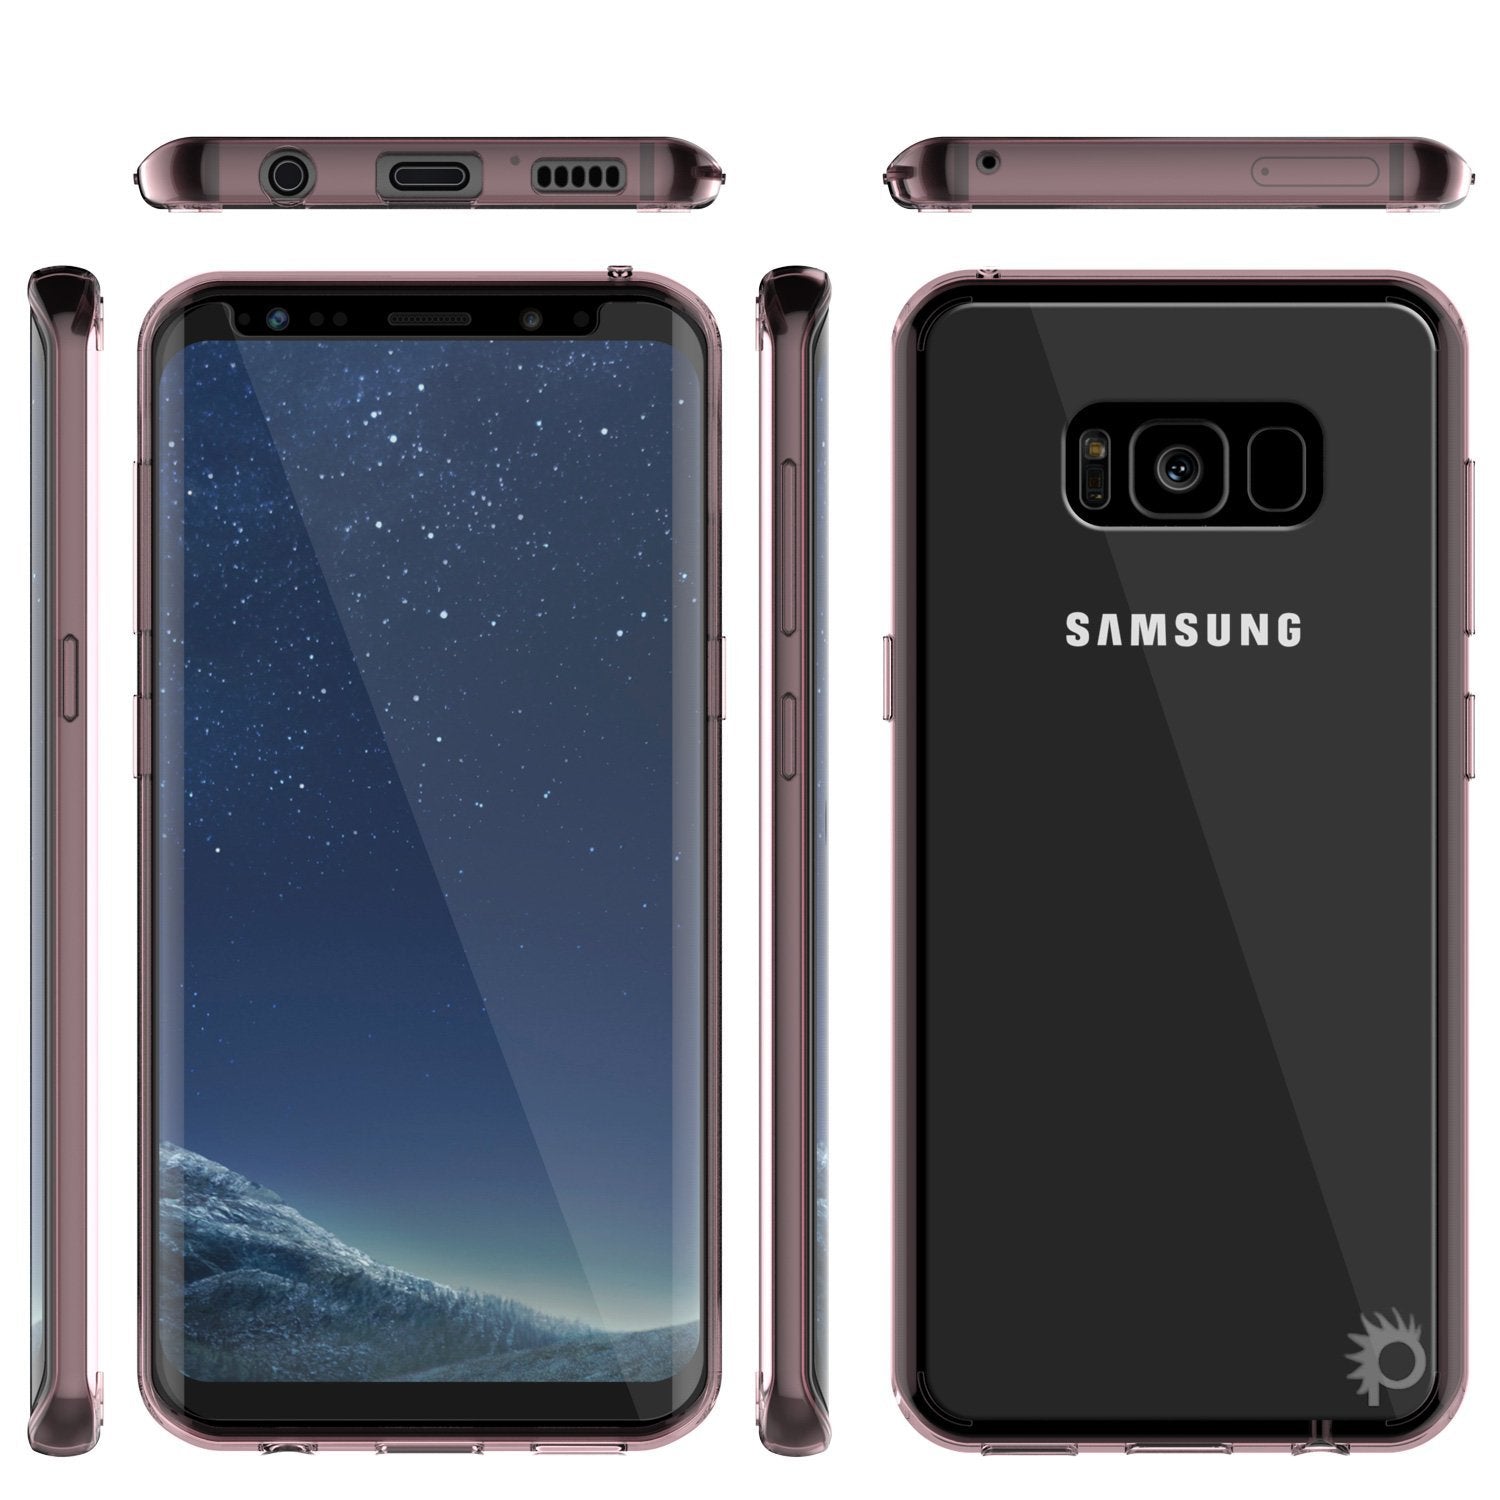 Galaxy S8 Case, Punkcase [LUCID 2.0 Series] [Slim Fit] [CRYSTAL PINK]